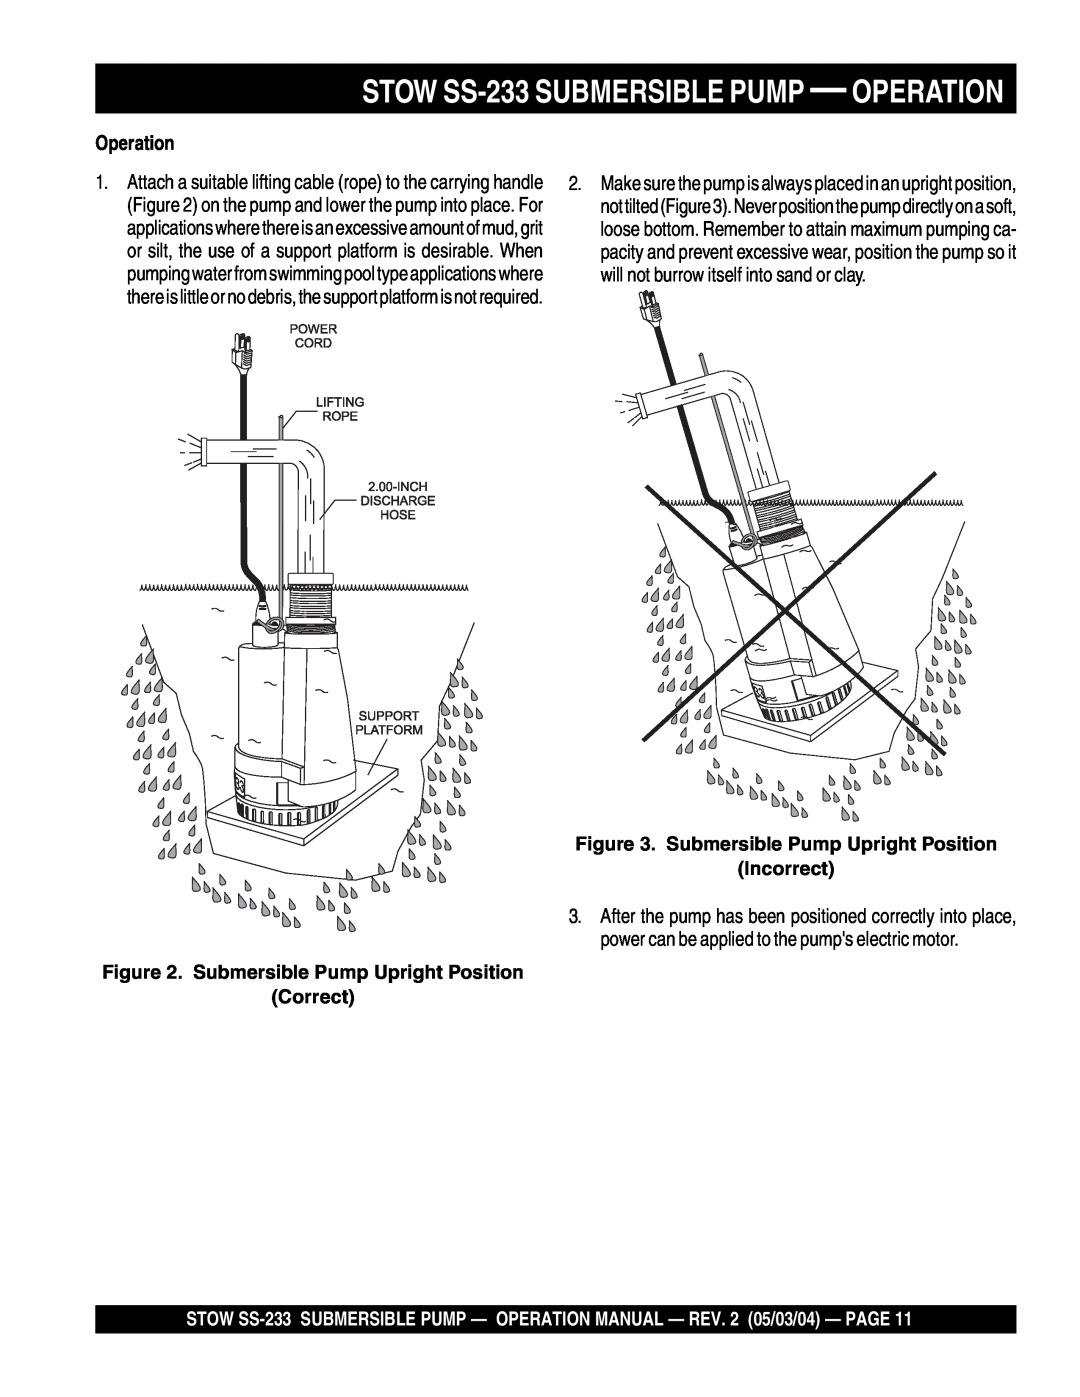 Multiquip manual STOW SS-233 SUBMERSIBLE PUMP - OPERATION, Operation, Submersible Pump Upright Position Incorrect 